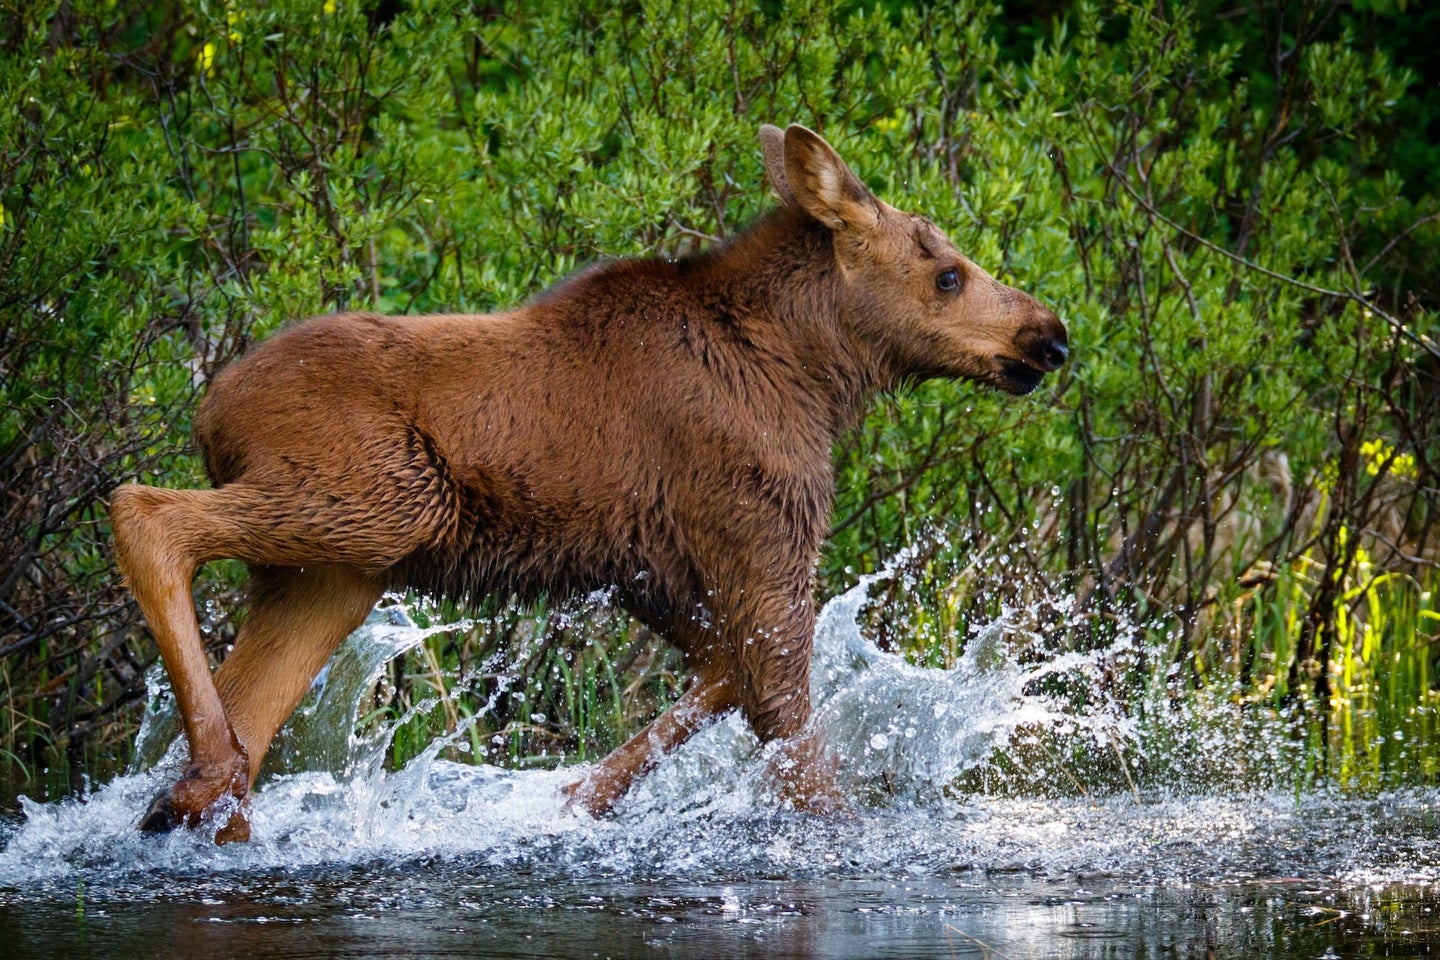 Moose calf running from grizzly bear in shallow water